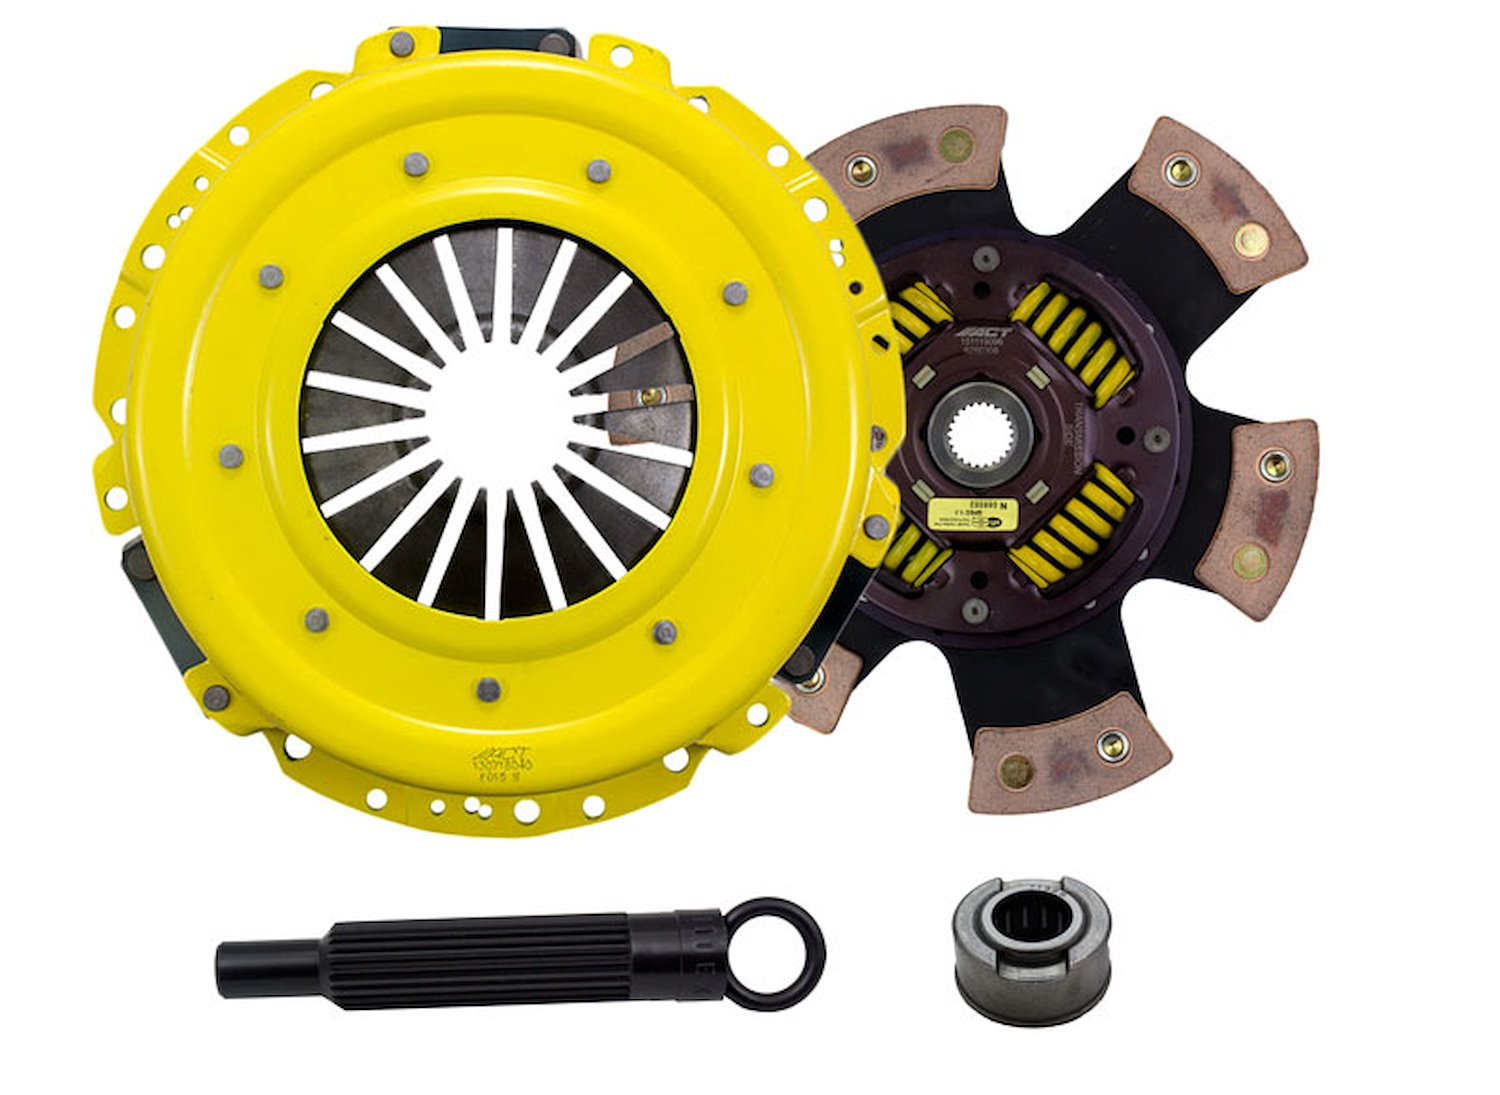 Sport/Race Sprung 6-Pad Transmission Clutch Kit Fits Select Ford/Lincoln/Mercury/Mazda